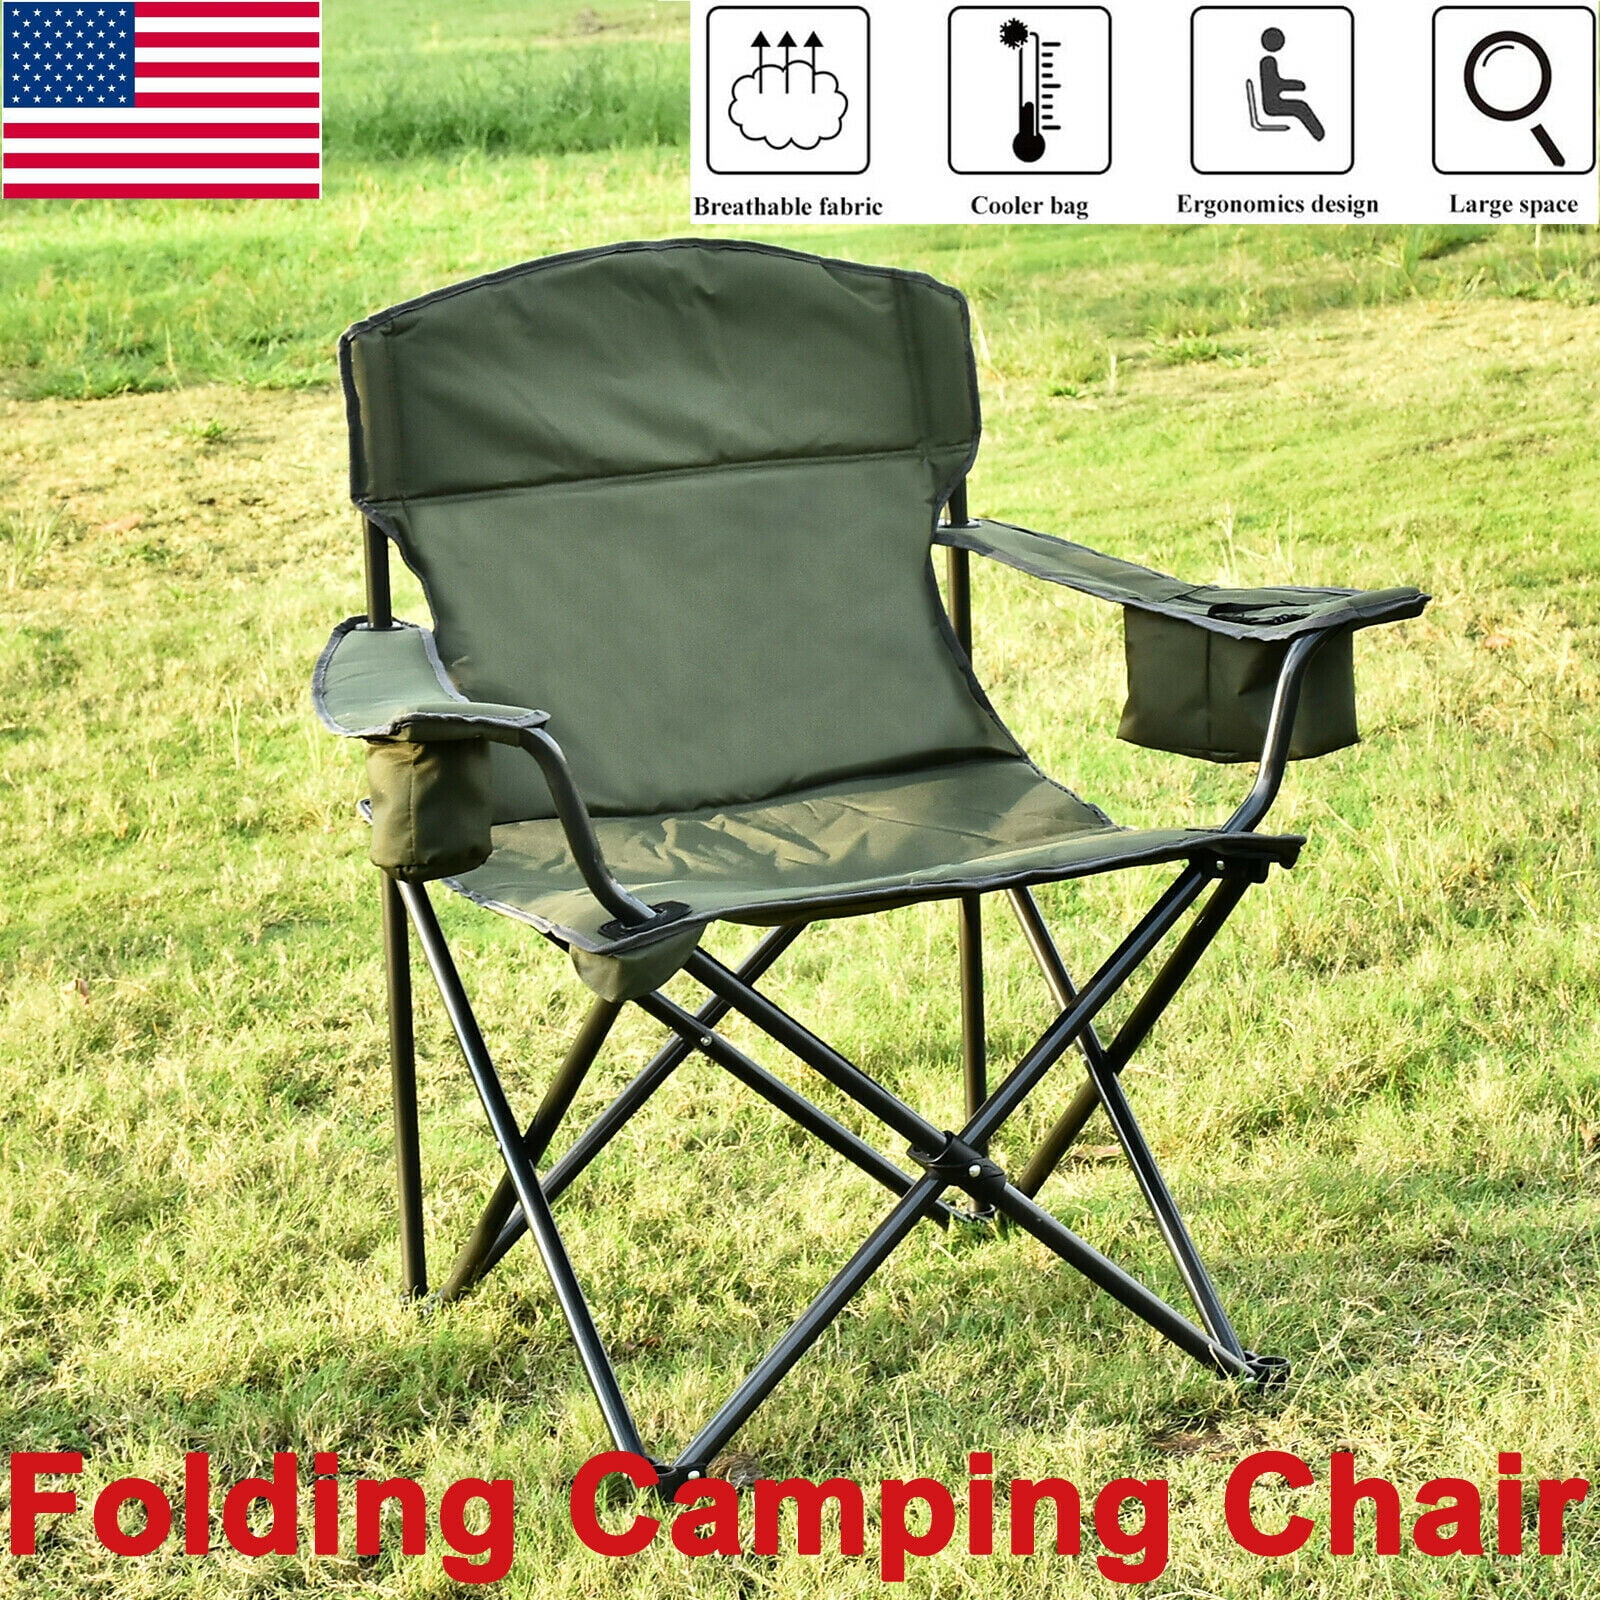 Carry Bag Included Hiking Backpacking Picnic Folding Camping Chairs Outdoor Portable Lawn Chairs Padded Foldable Chairs Outdoor with Cup Holder Camp Chair for Beach Travel Fishing Lightweight